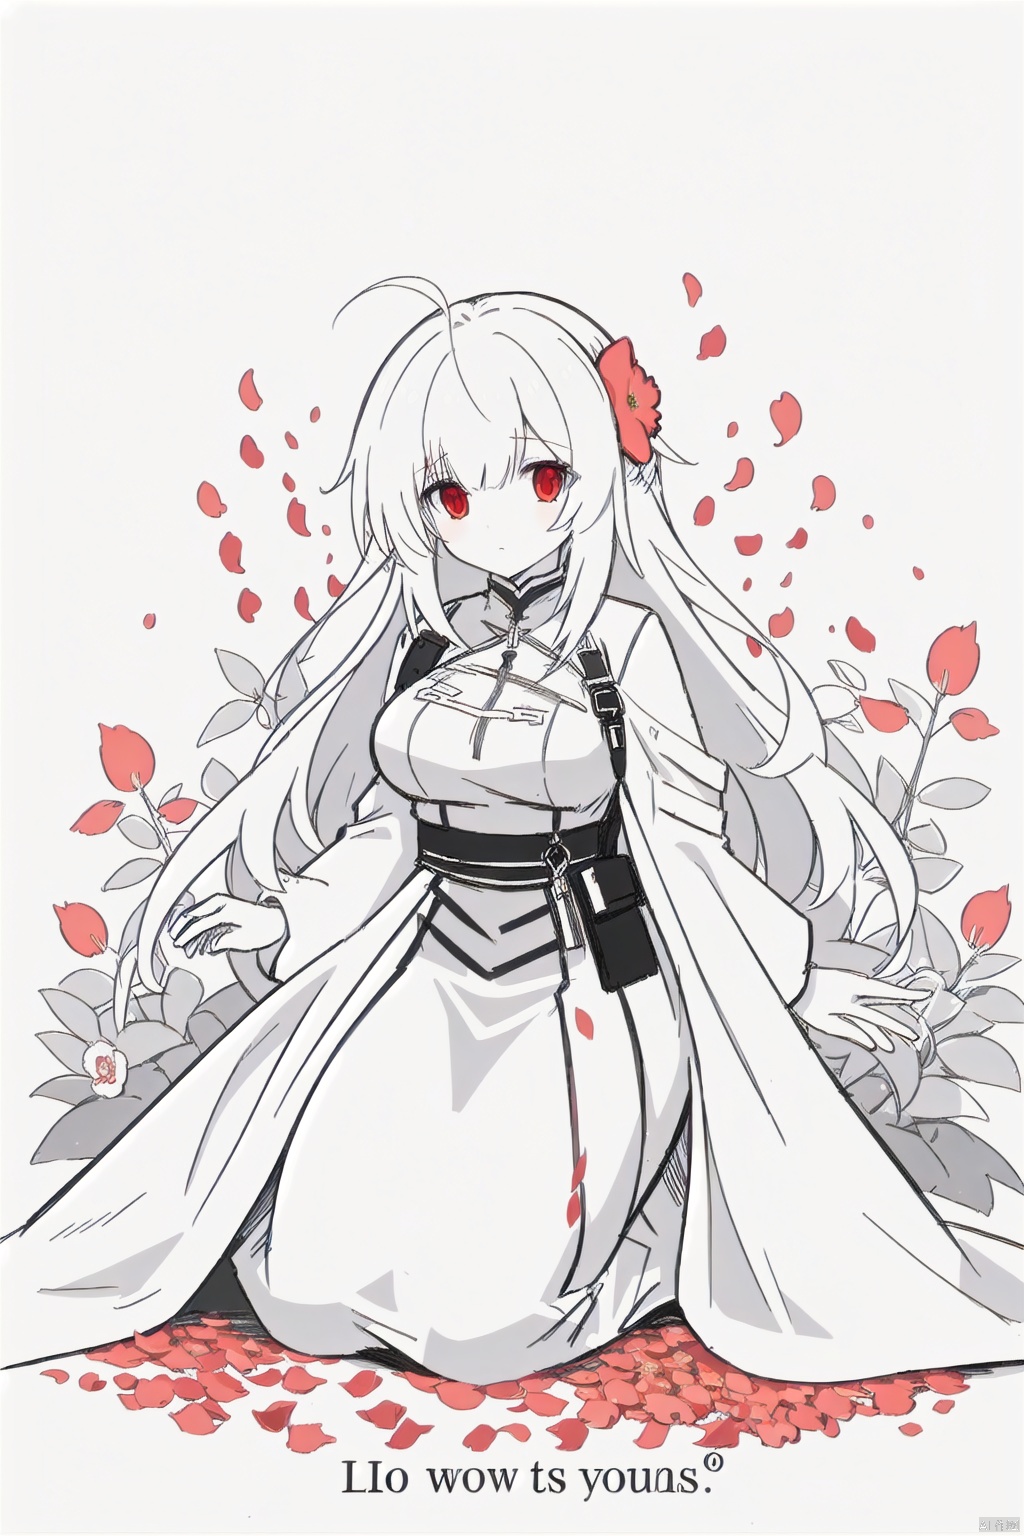  (masterpiece),(best quality),illustration,ultra detailed,hdr,Depth of field,(colorful),1girl,red eyes,white long translucent night gown,expressionless,(white hair),hair cover one eye,long hair,red hair flower,kneeling on lake,blood,(plenty of red petals:1.35),(white background:1.5),(English text),greyscale,monochrome,greyscale,monochrome,sketch, Kal'tsit, white hell, Migunov, gummy_(arknights),monoclor,lineart, phSaber, TUSHAN HONGHONG, guoflinke, yinyou,yinyou color, ATB gigantic and bursting breasts, KannaKamui, w_(arknights)